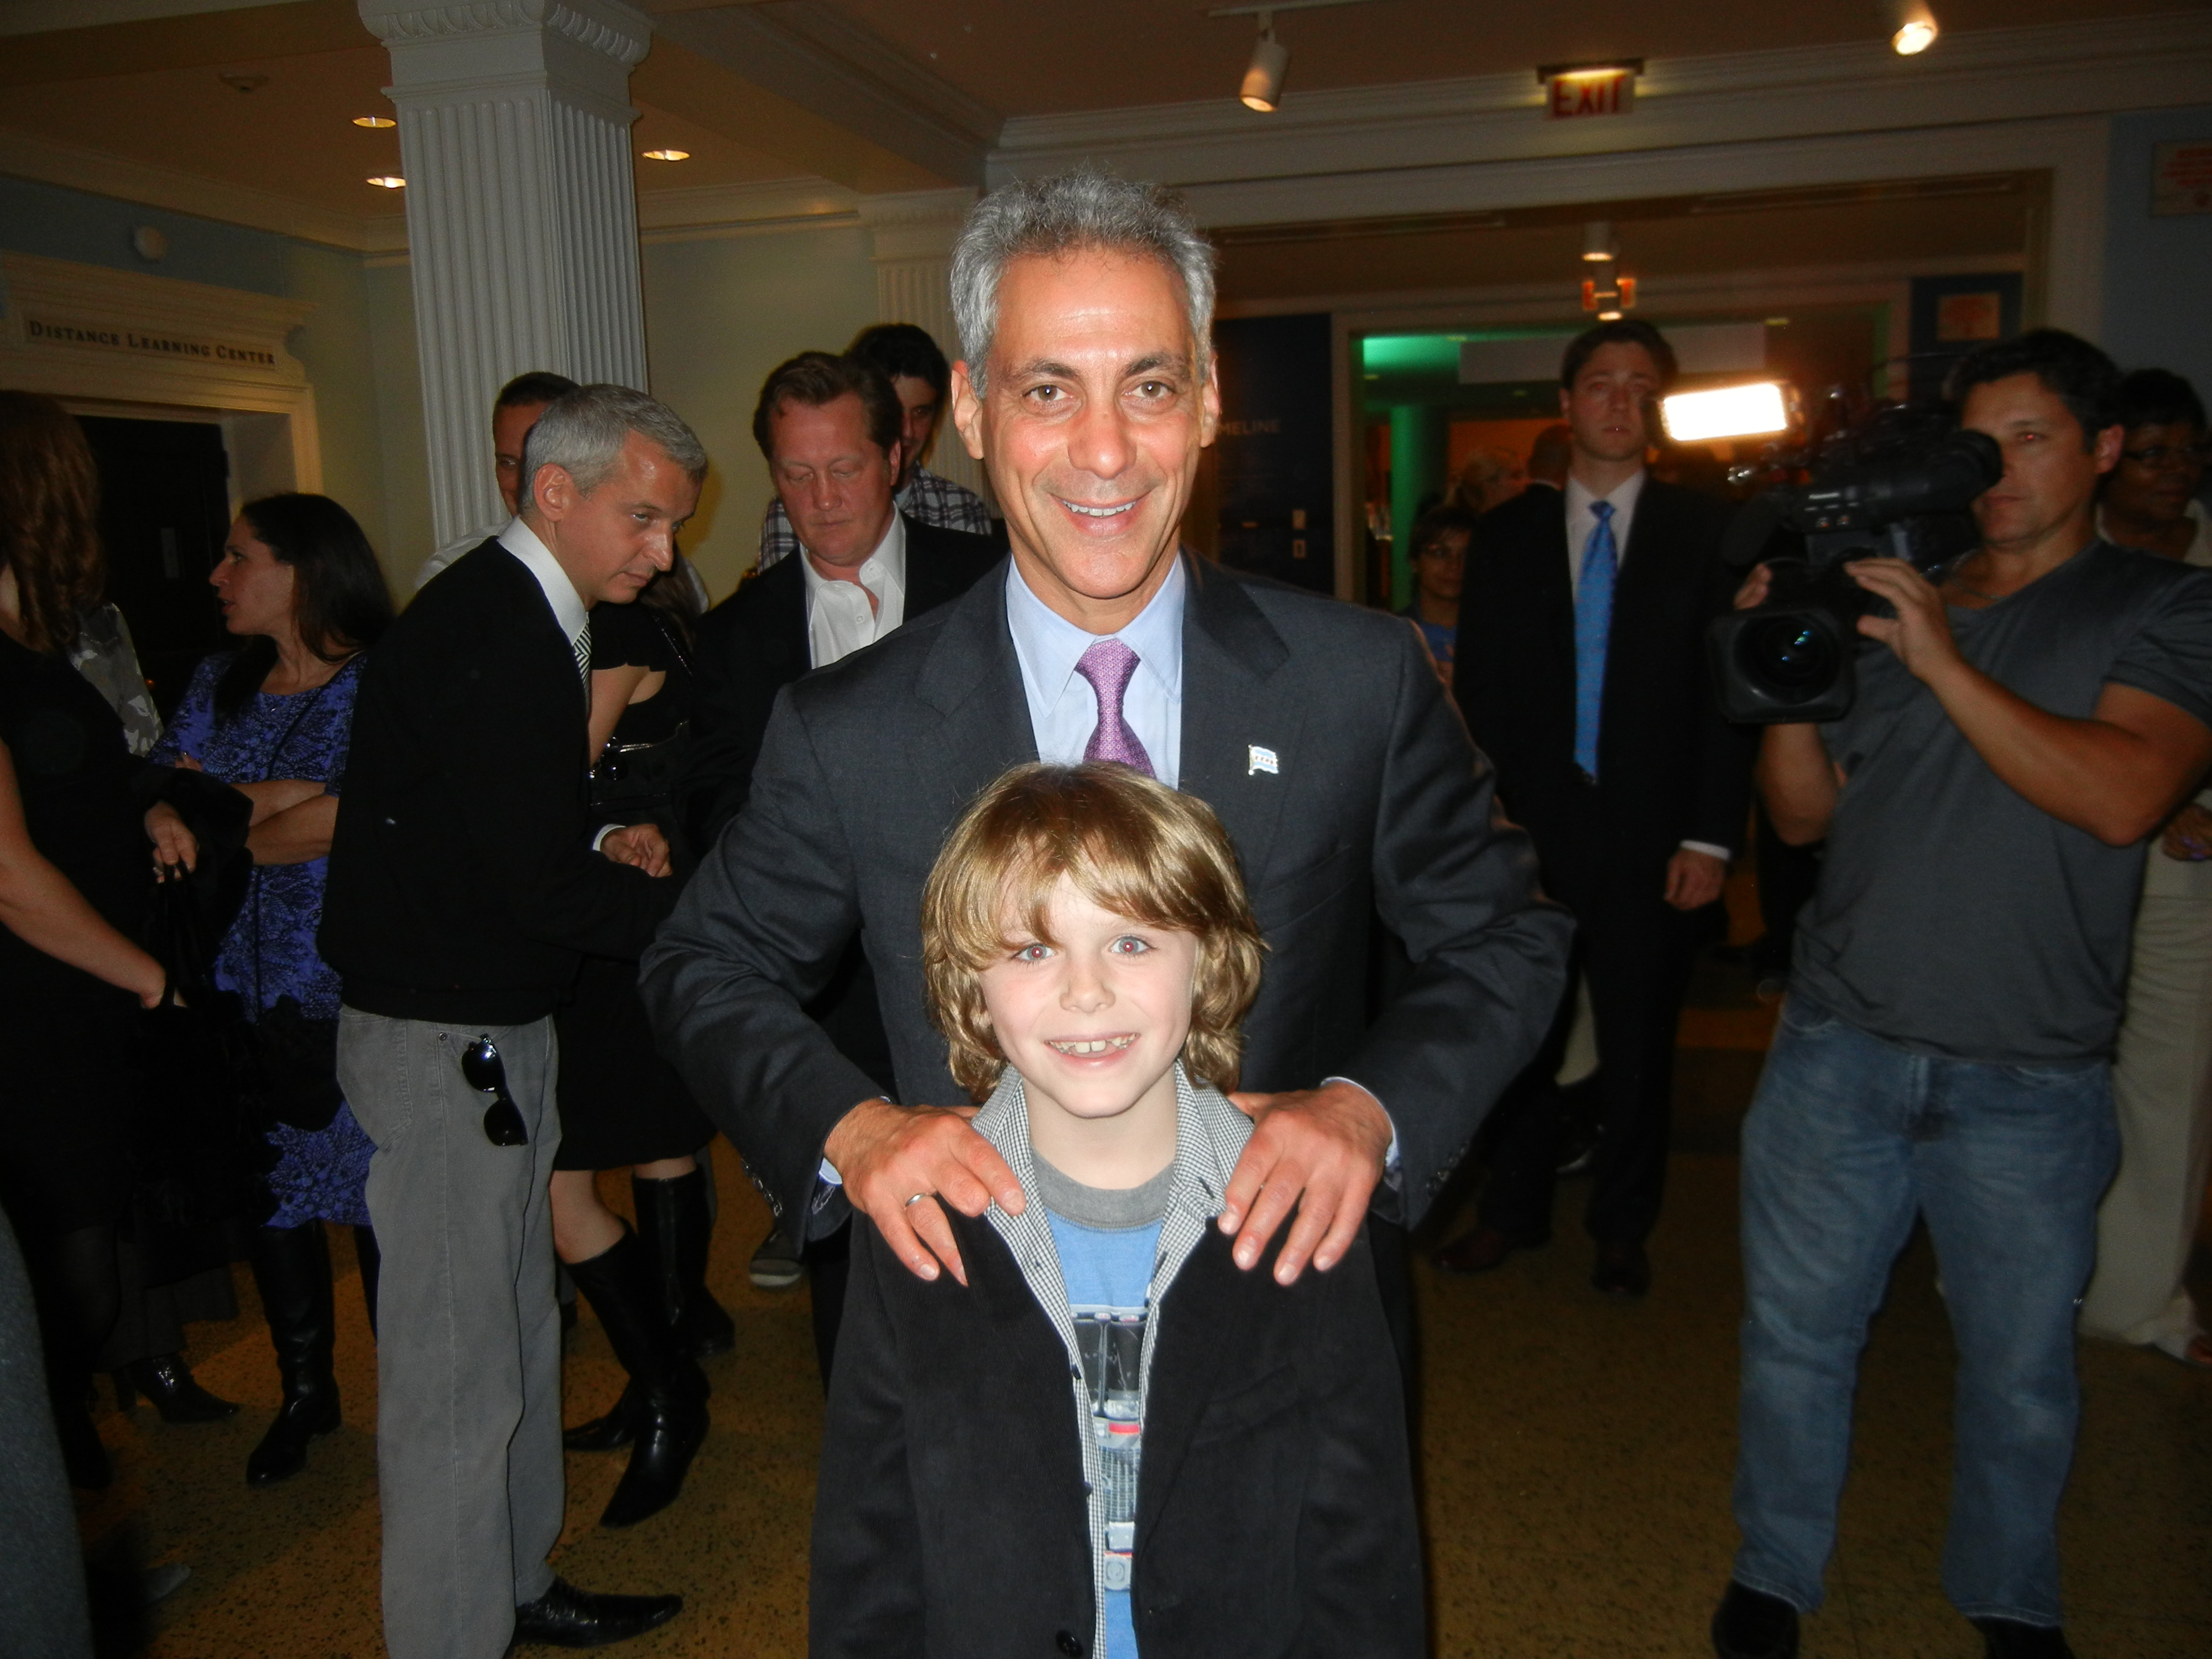 Griffin Kane with Rahm Emanuel at the Chicago Fire Premiere, 2012